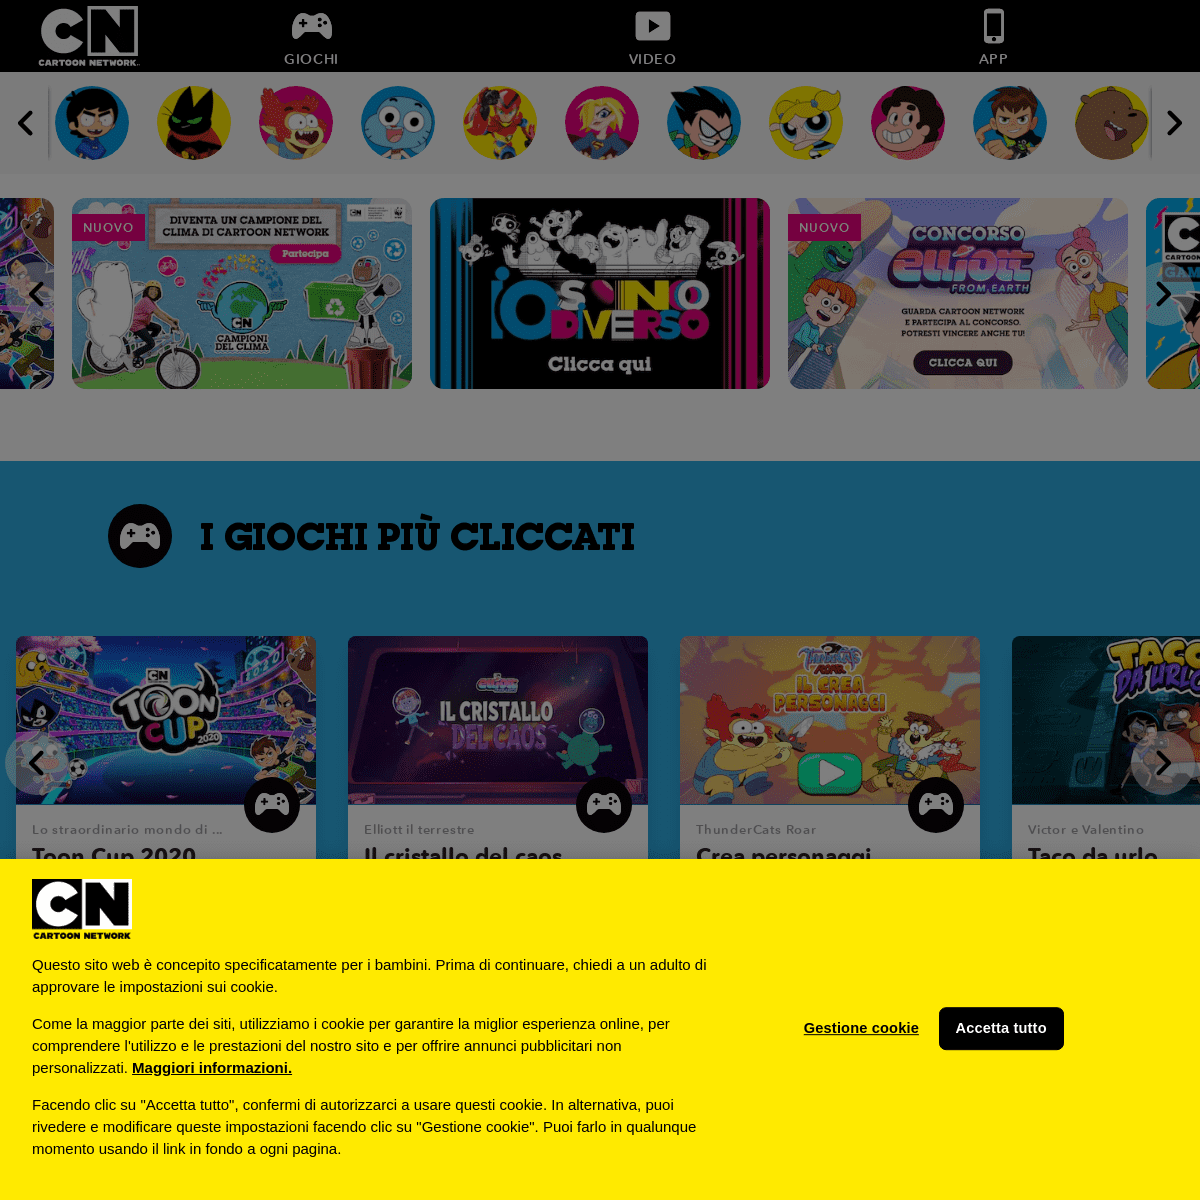 A complete backup of https://cartoonnetwork.it